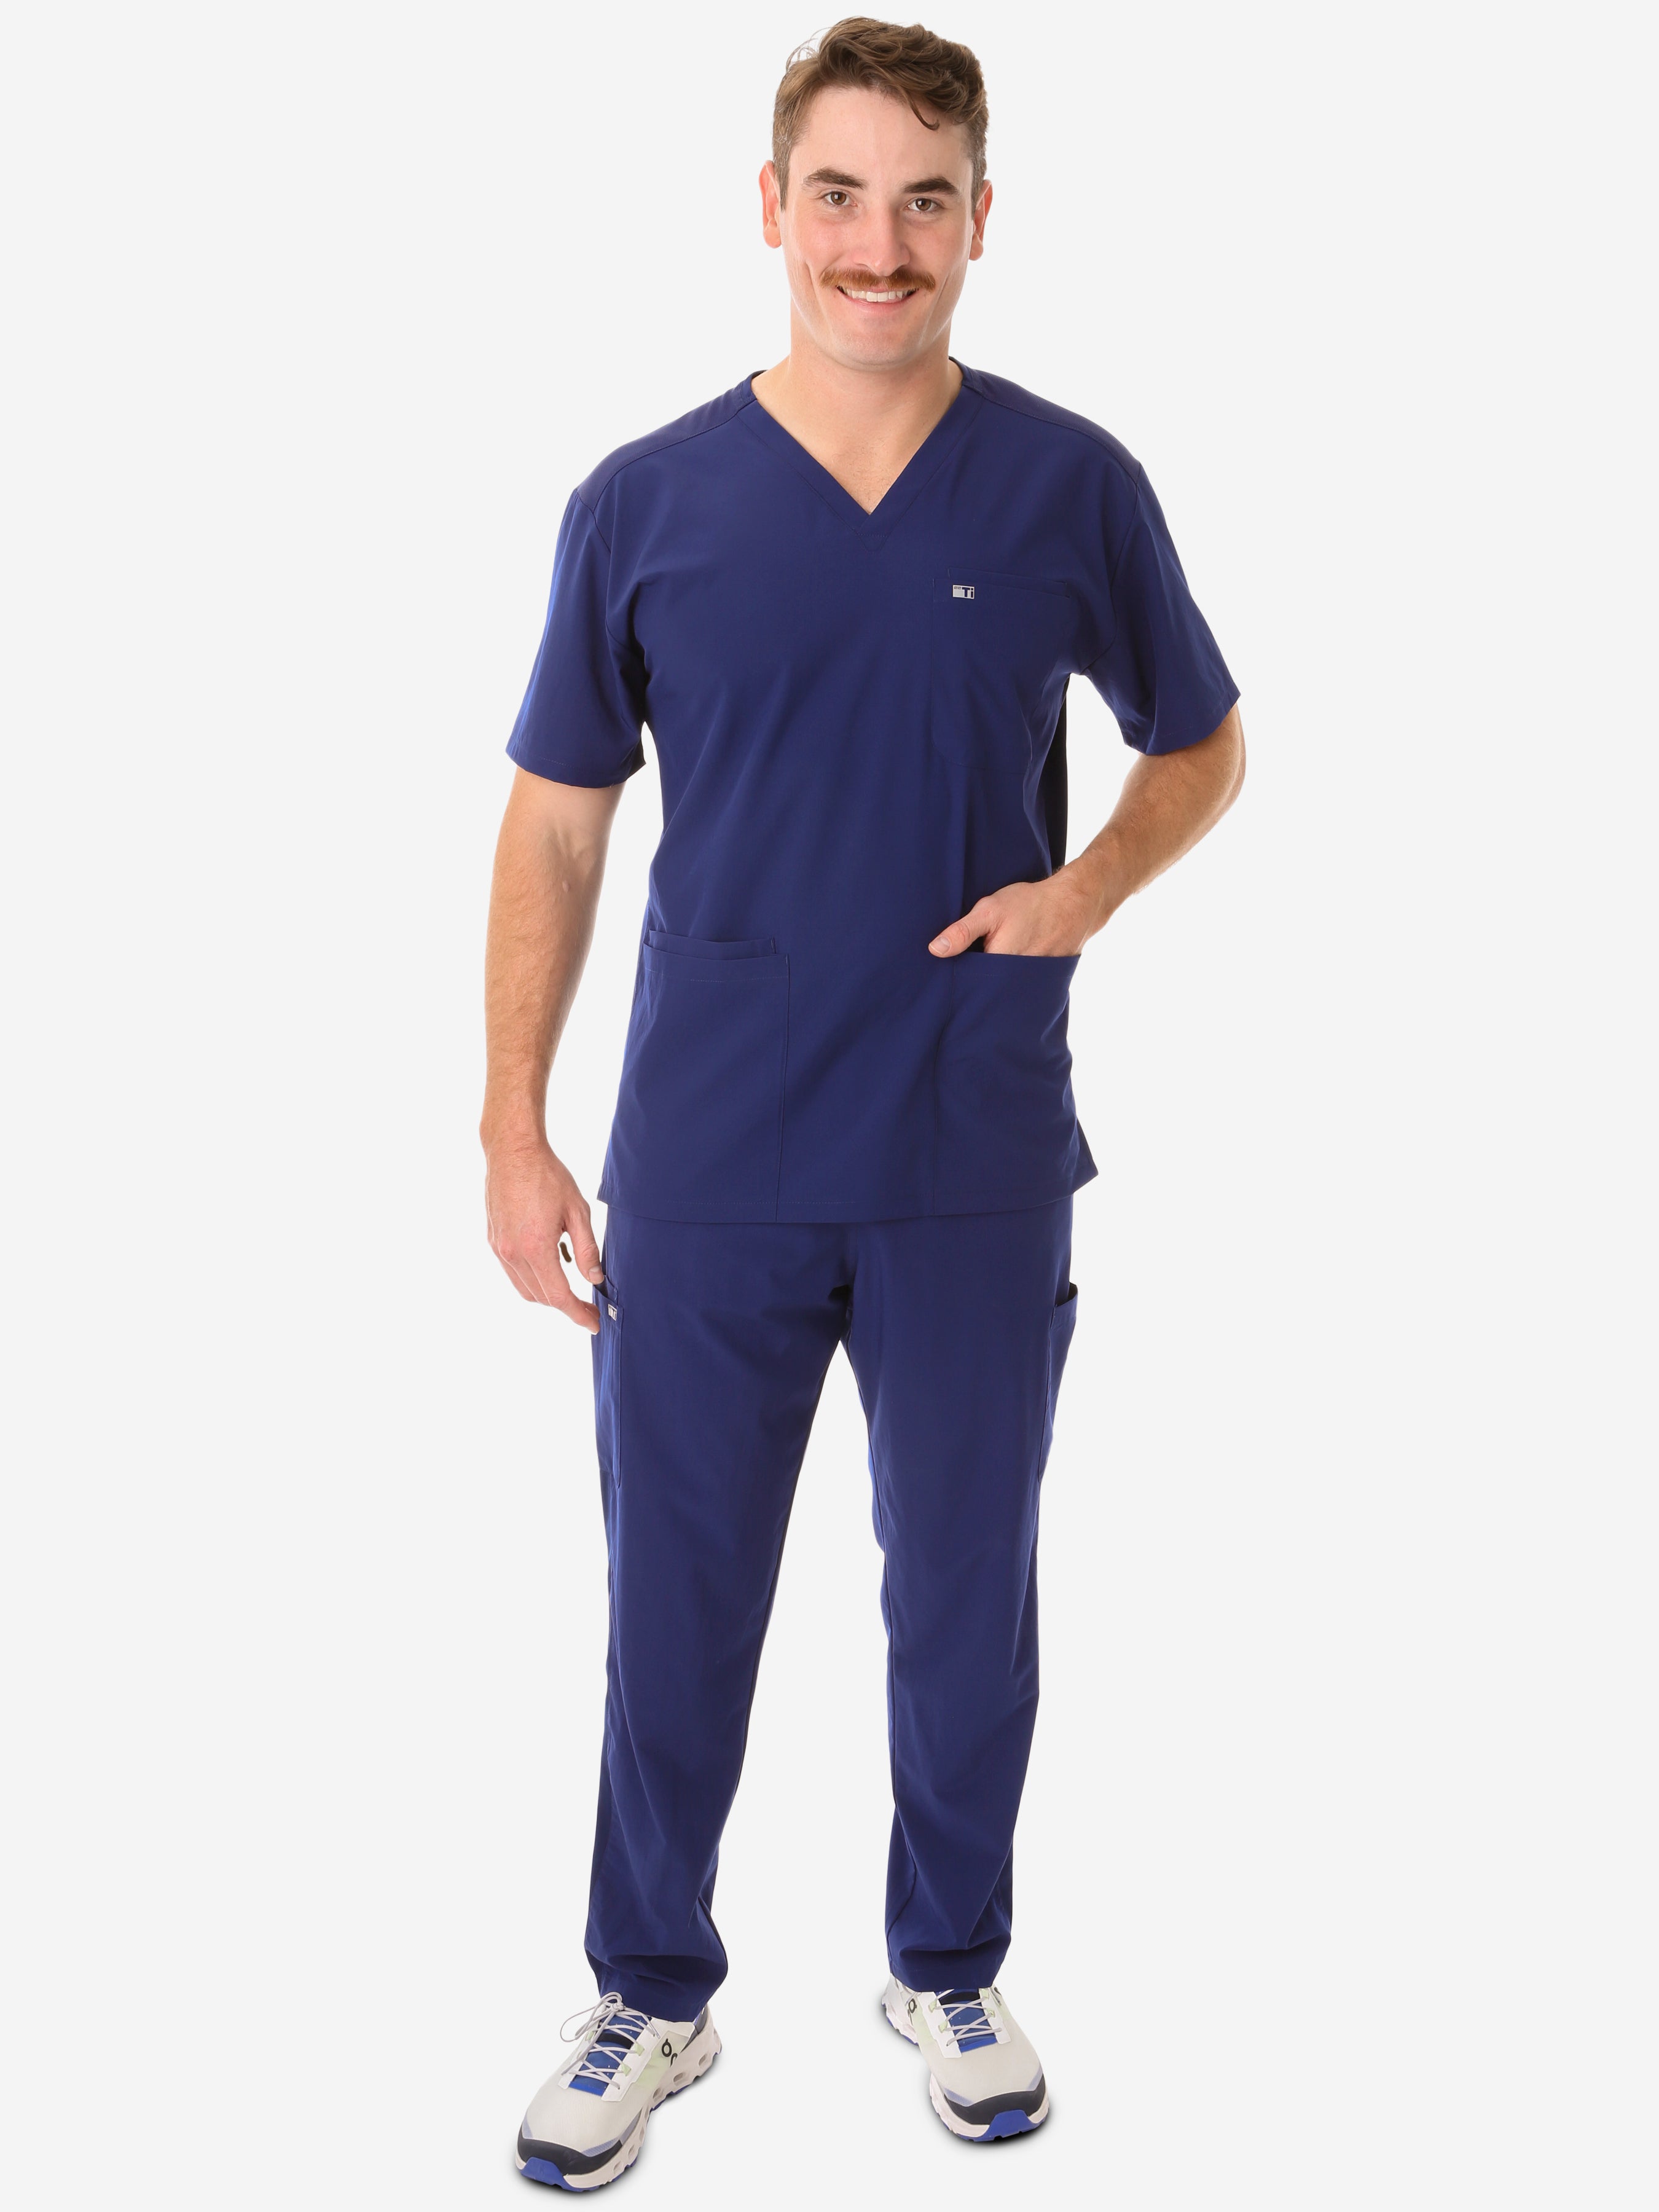 Men's Navy Blue Five-Pocket Scrub Top Full Body Front View with 9-Pocket Pants